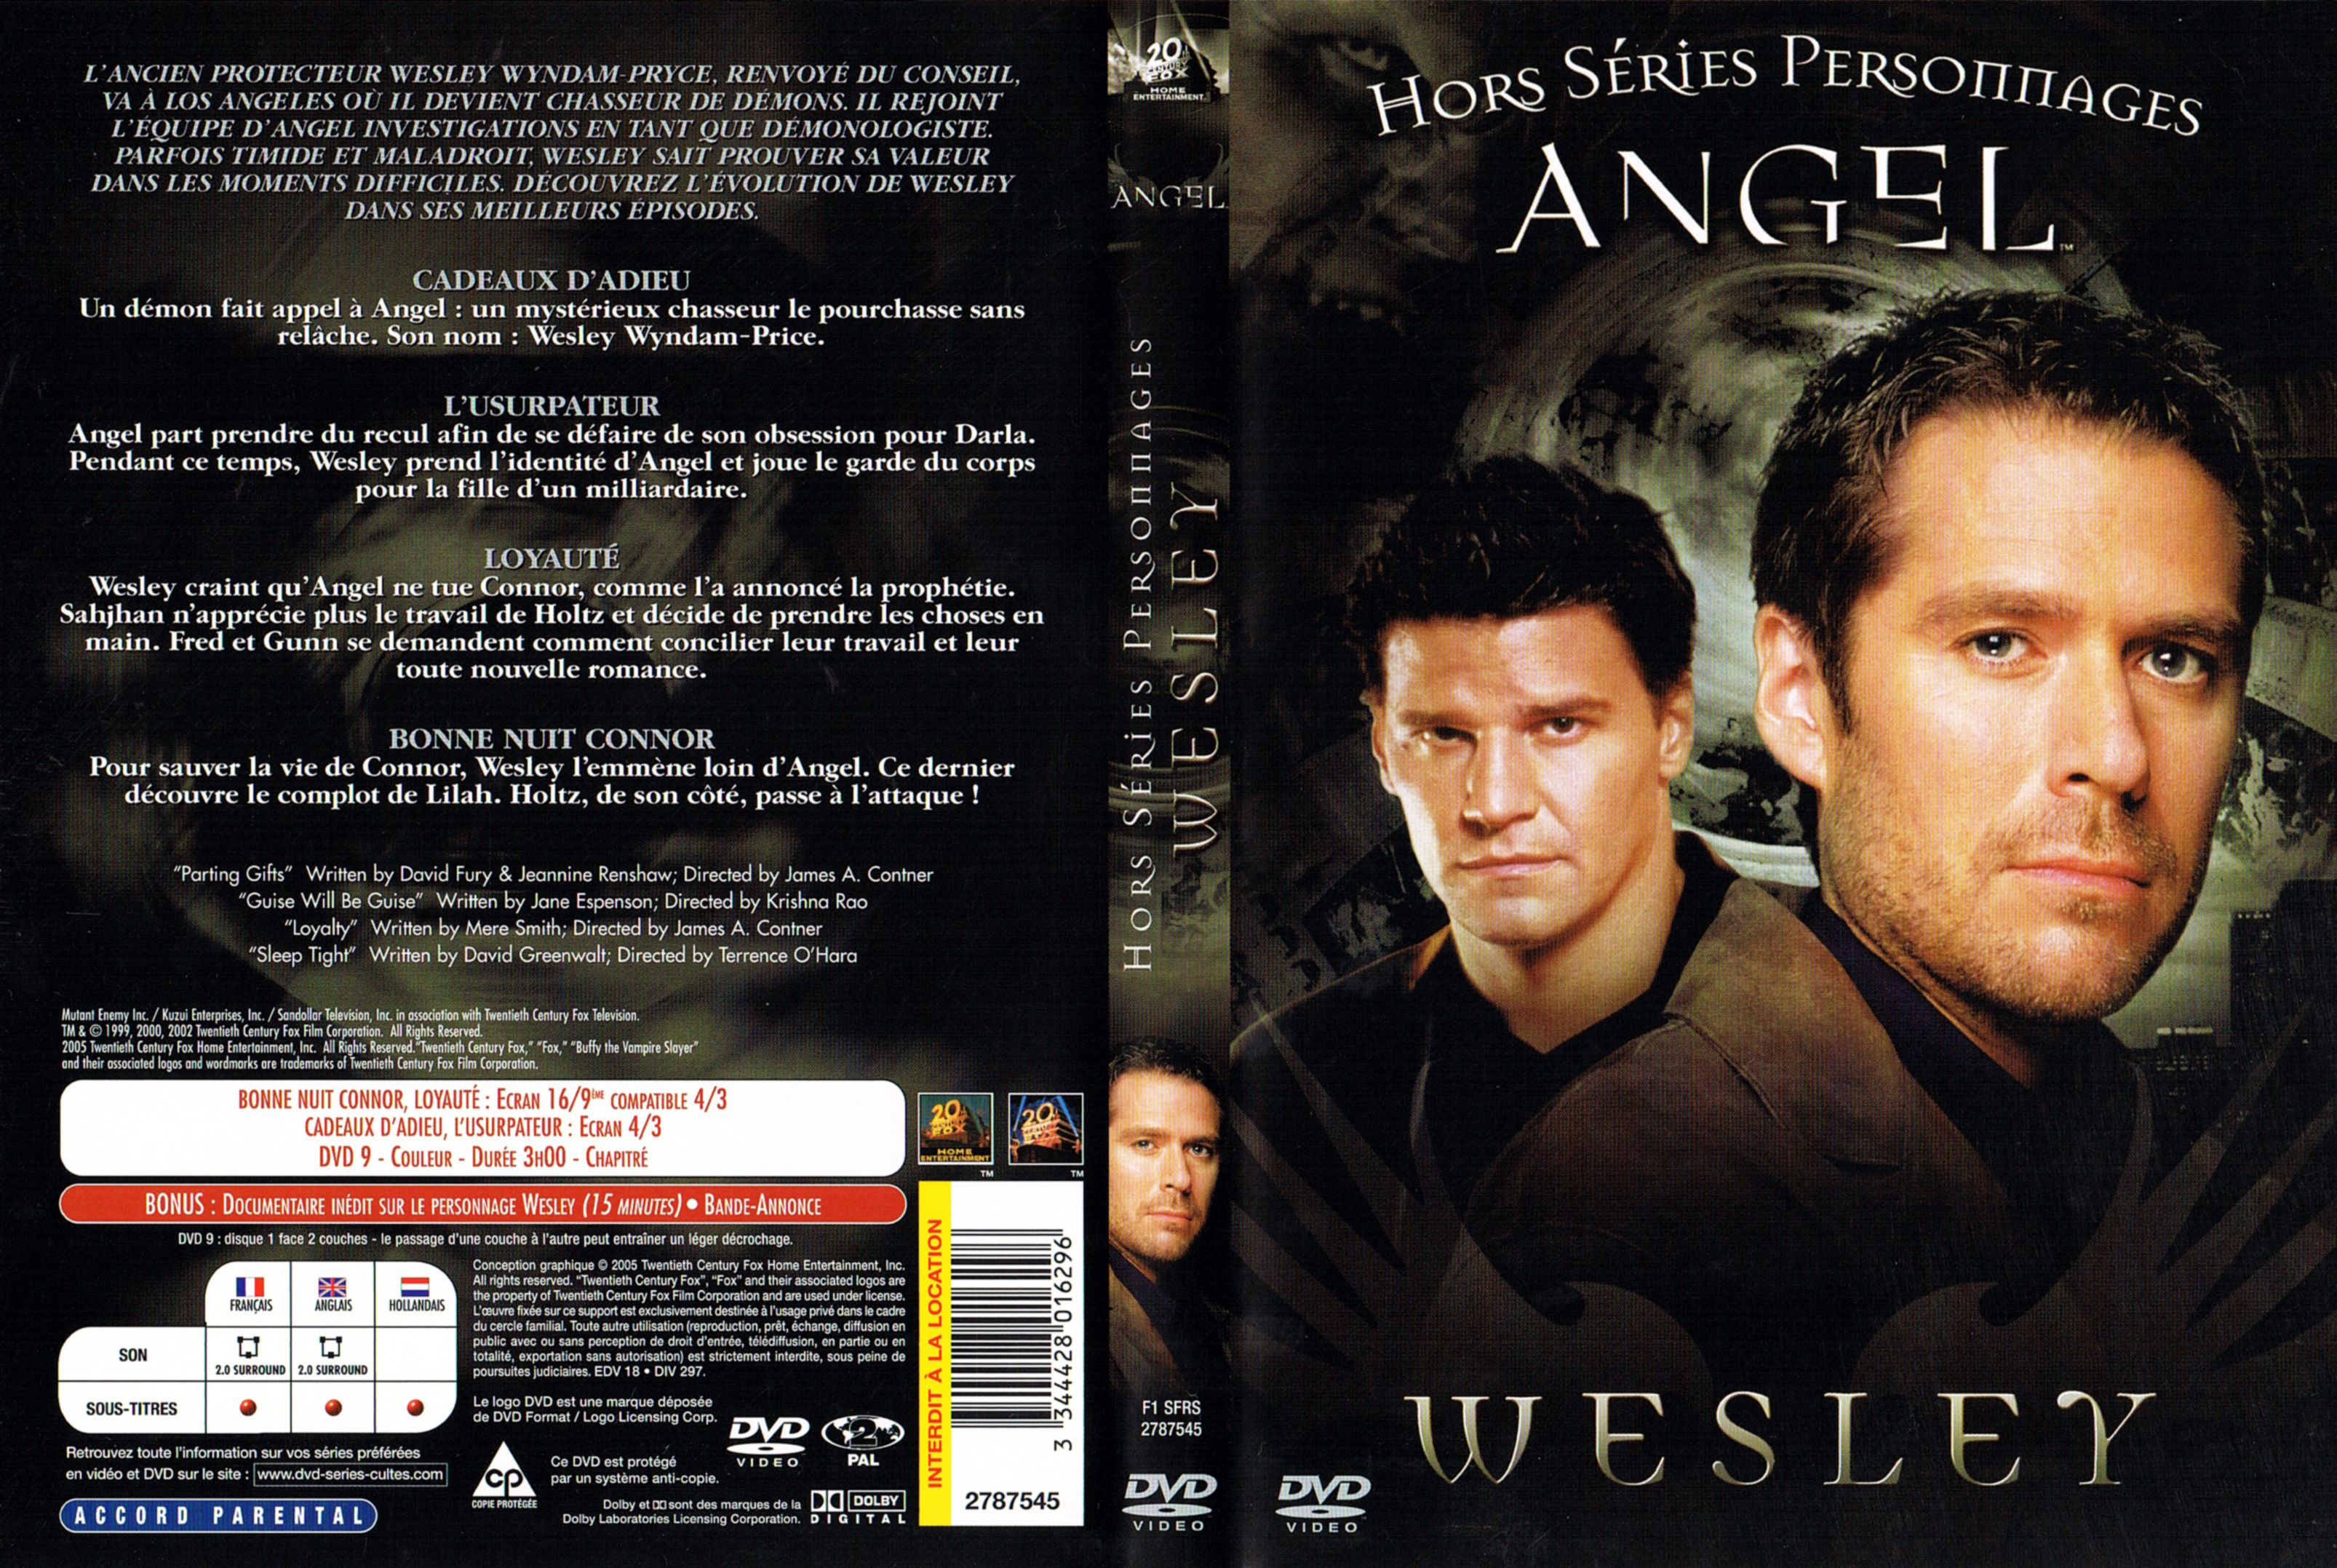 Jaquette DVD Angel Hors Series Personnages Wesley